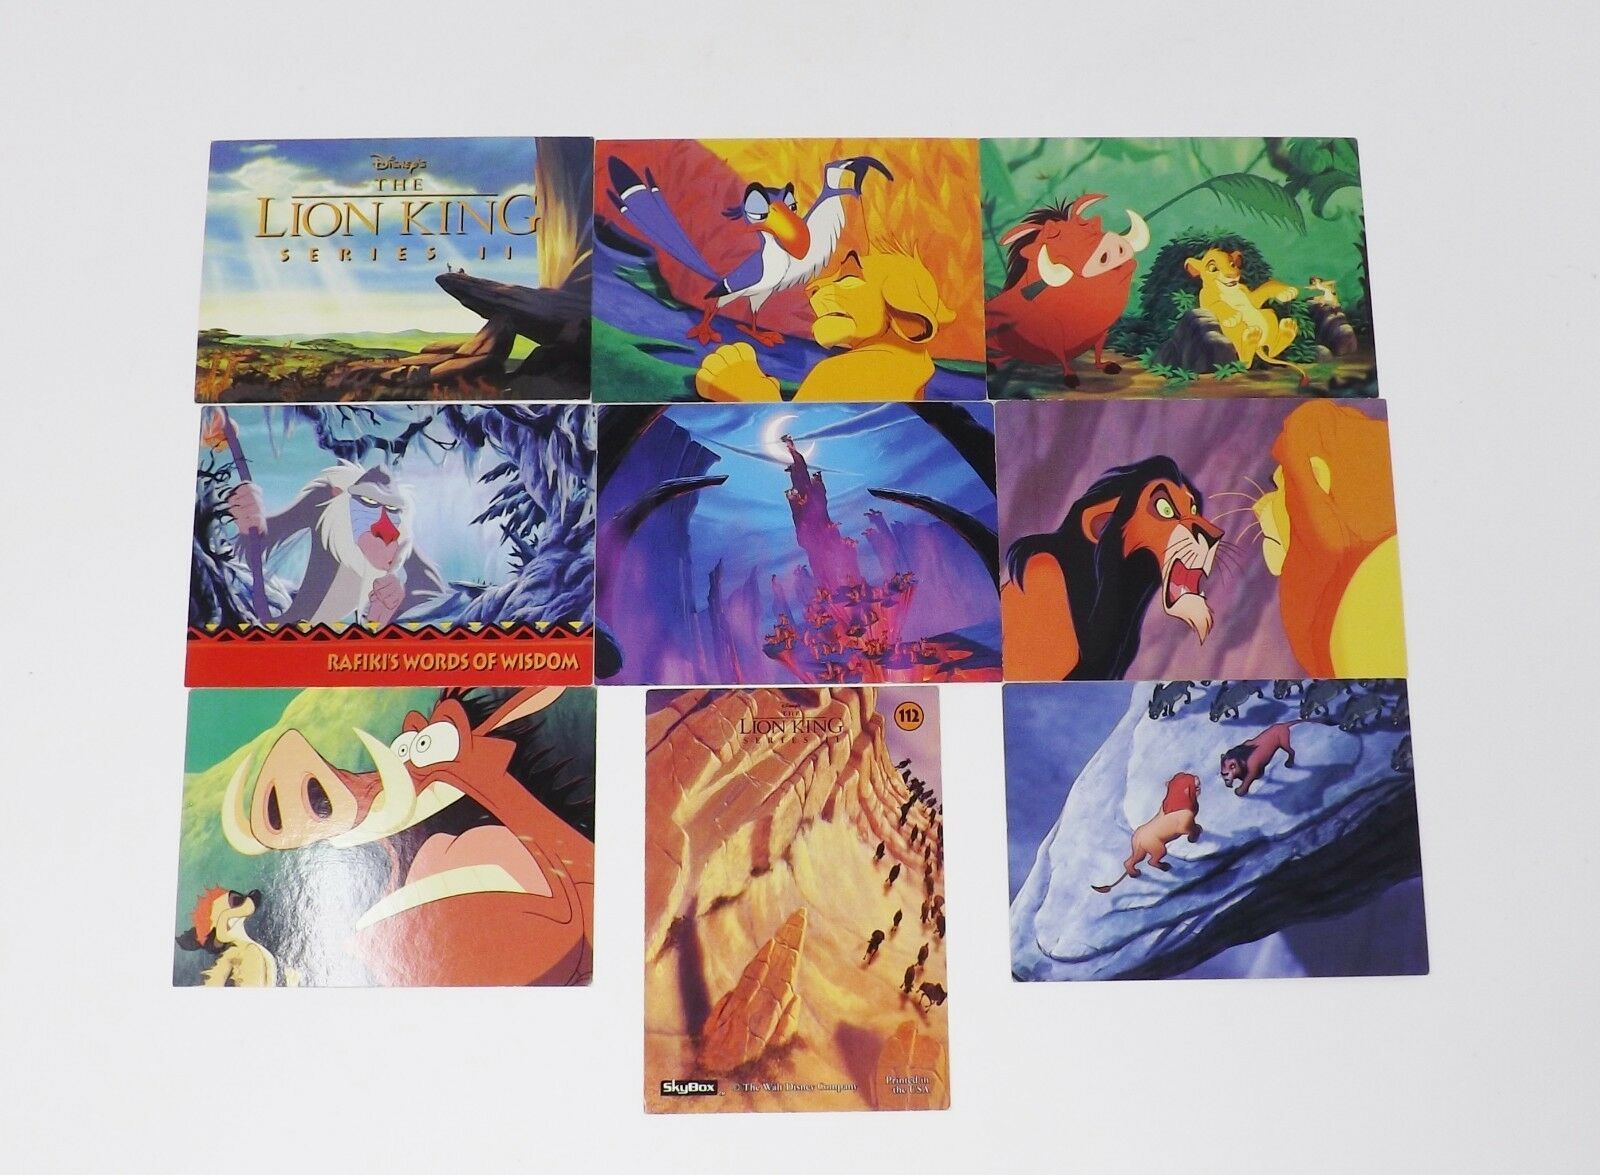 Primary image for Skybox Lion King Series II Walt Disney Trading Cards - 9 Card Lot